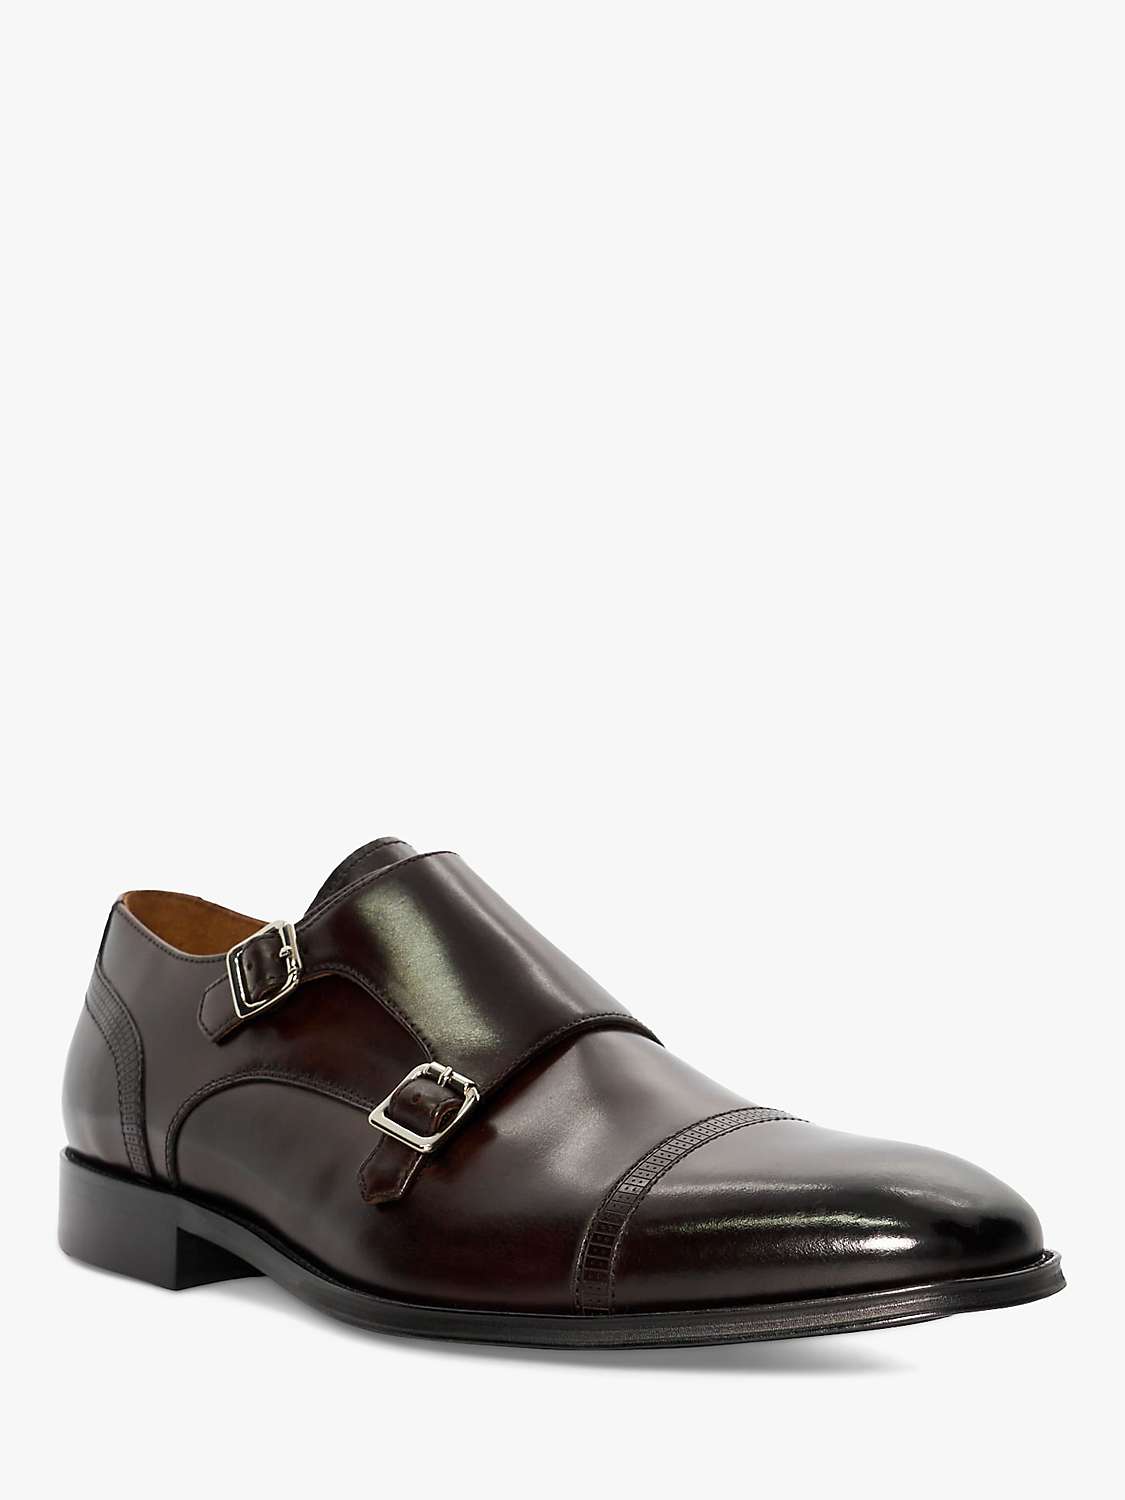 Buy Dune Saloon Leather Double Monk Shoes Online at johnlewis.com